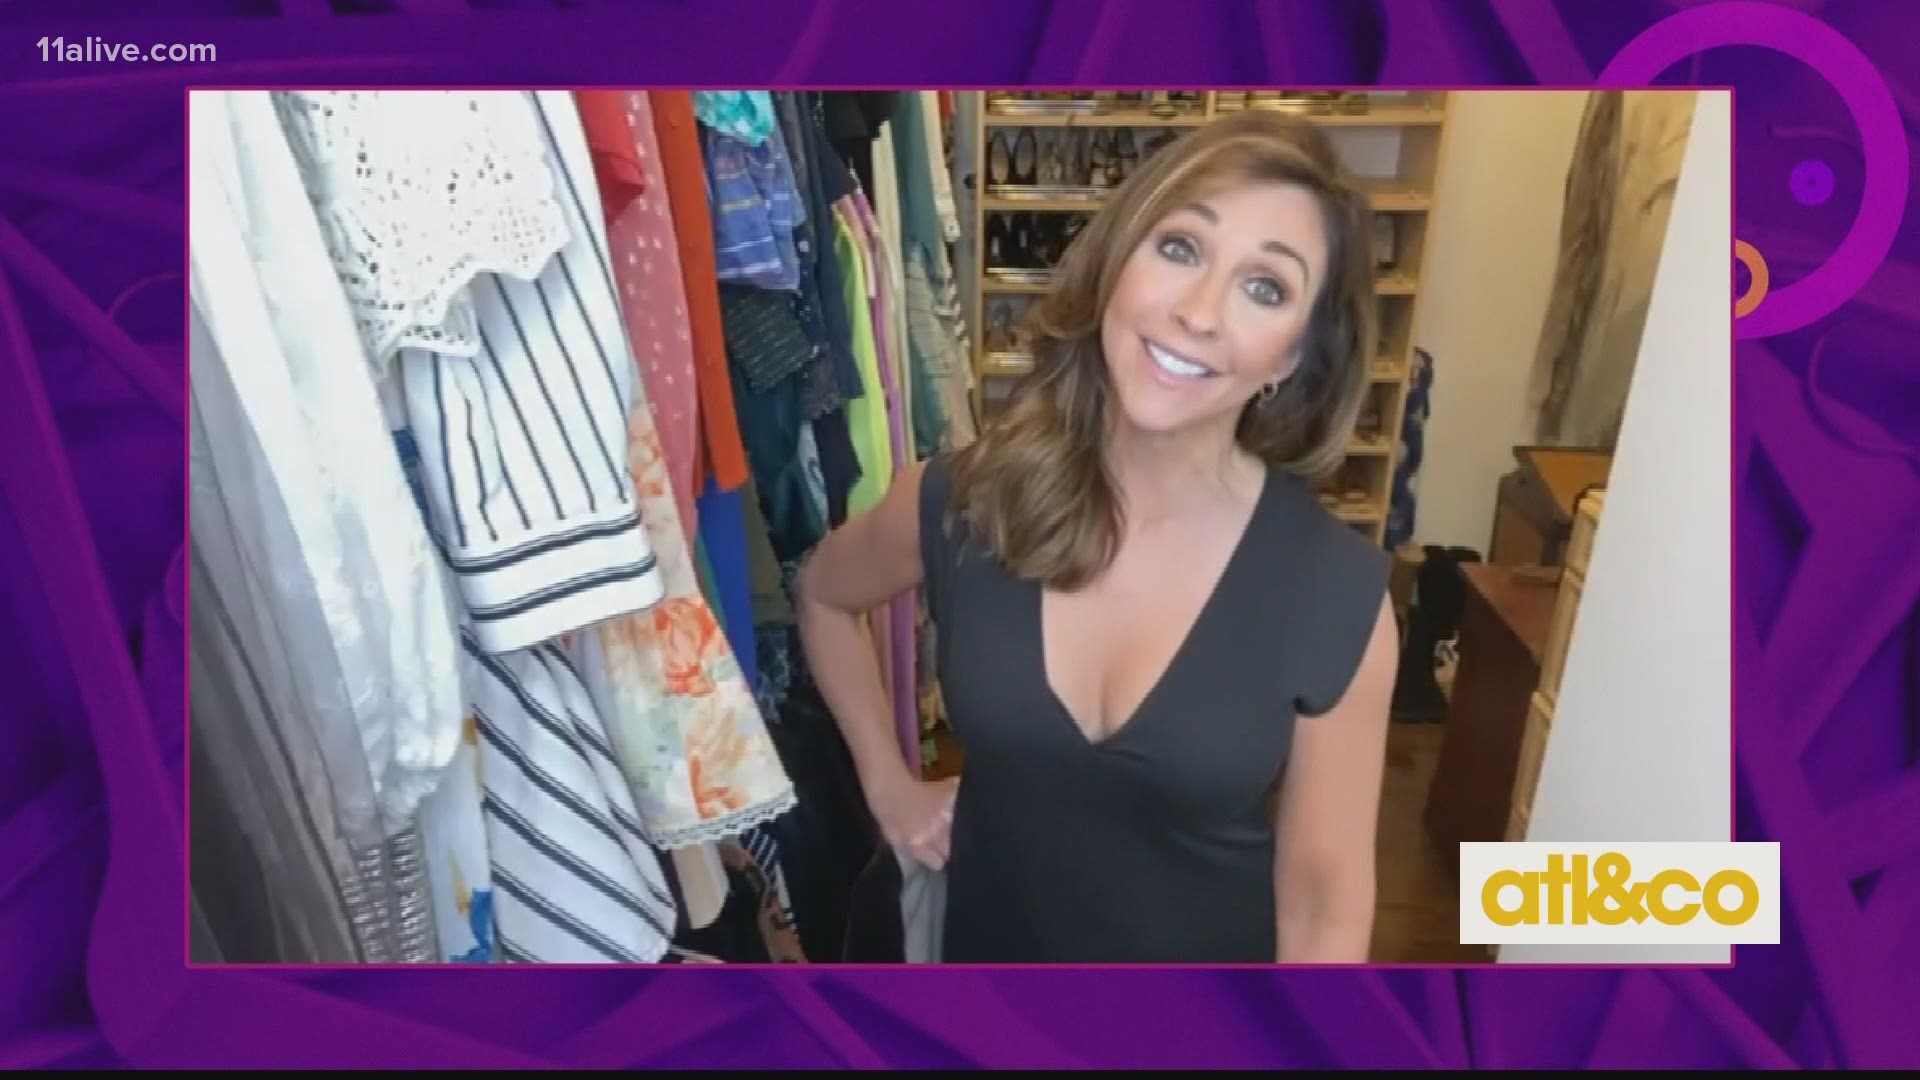 Christine and Cara take you inside their closets to reveal interesting outfit choices and special keepsakes.